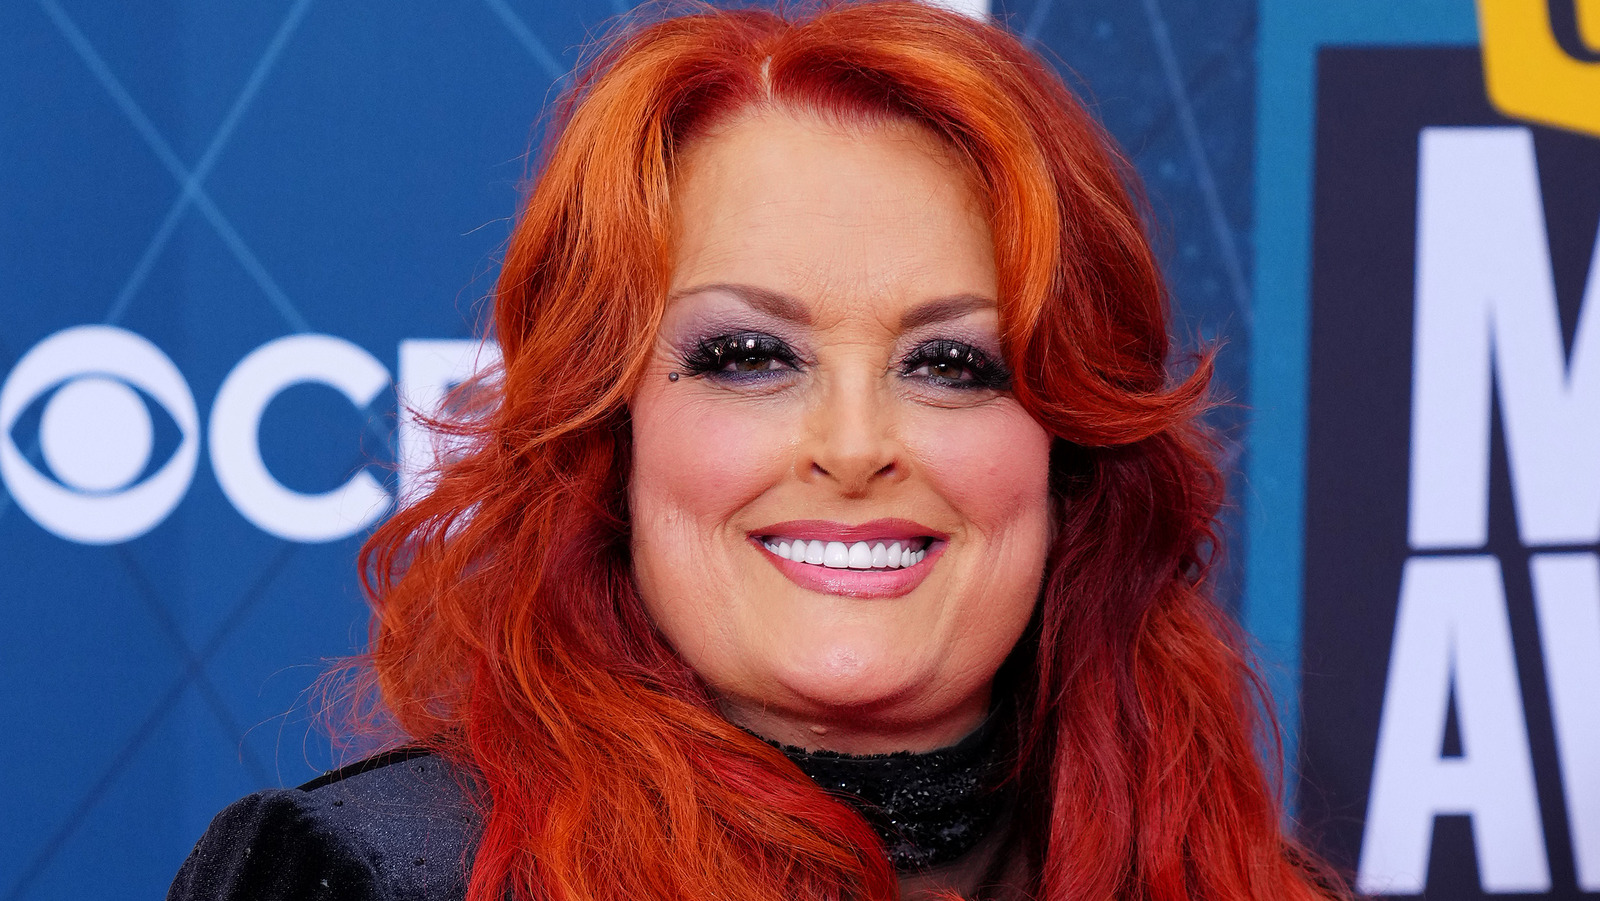 Wynonna Judd's Return To 2023 CMT Awards Without Mom Naomi Is More